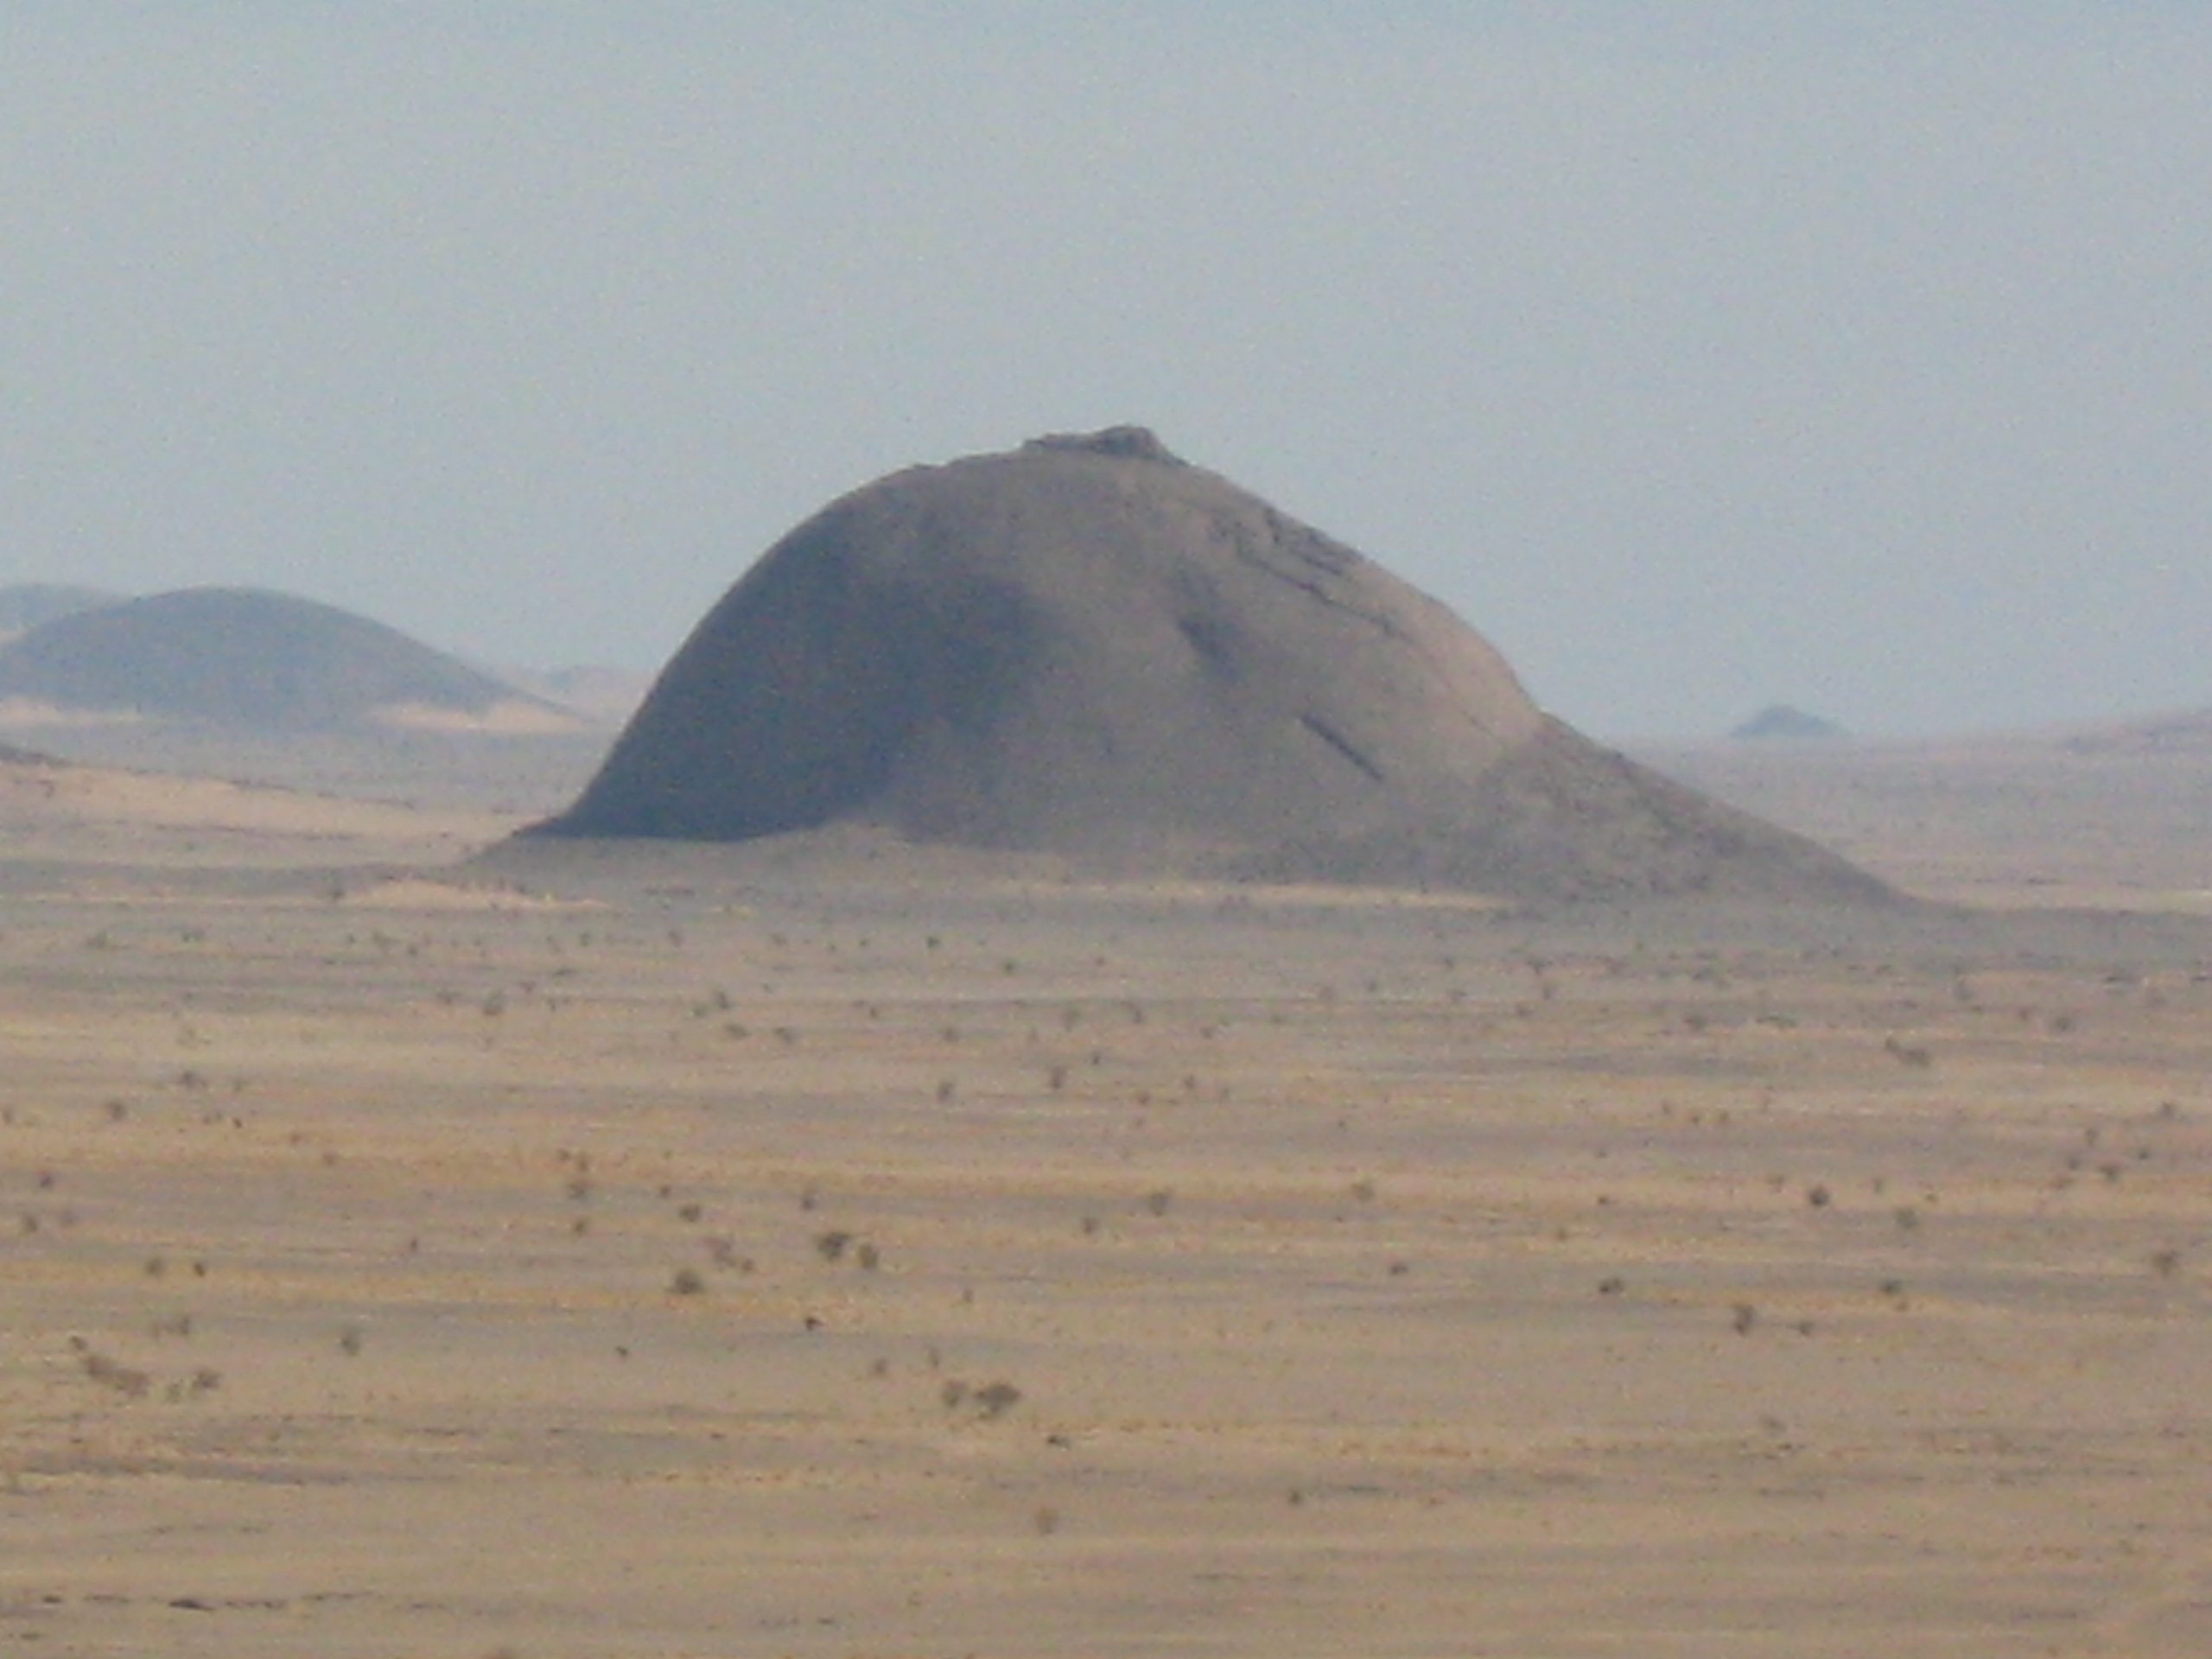 Rounded mountain in a desert